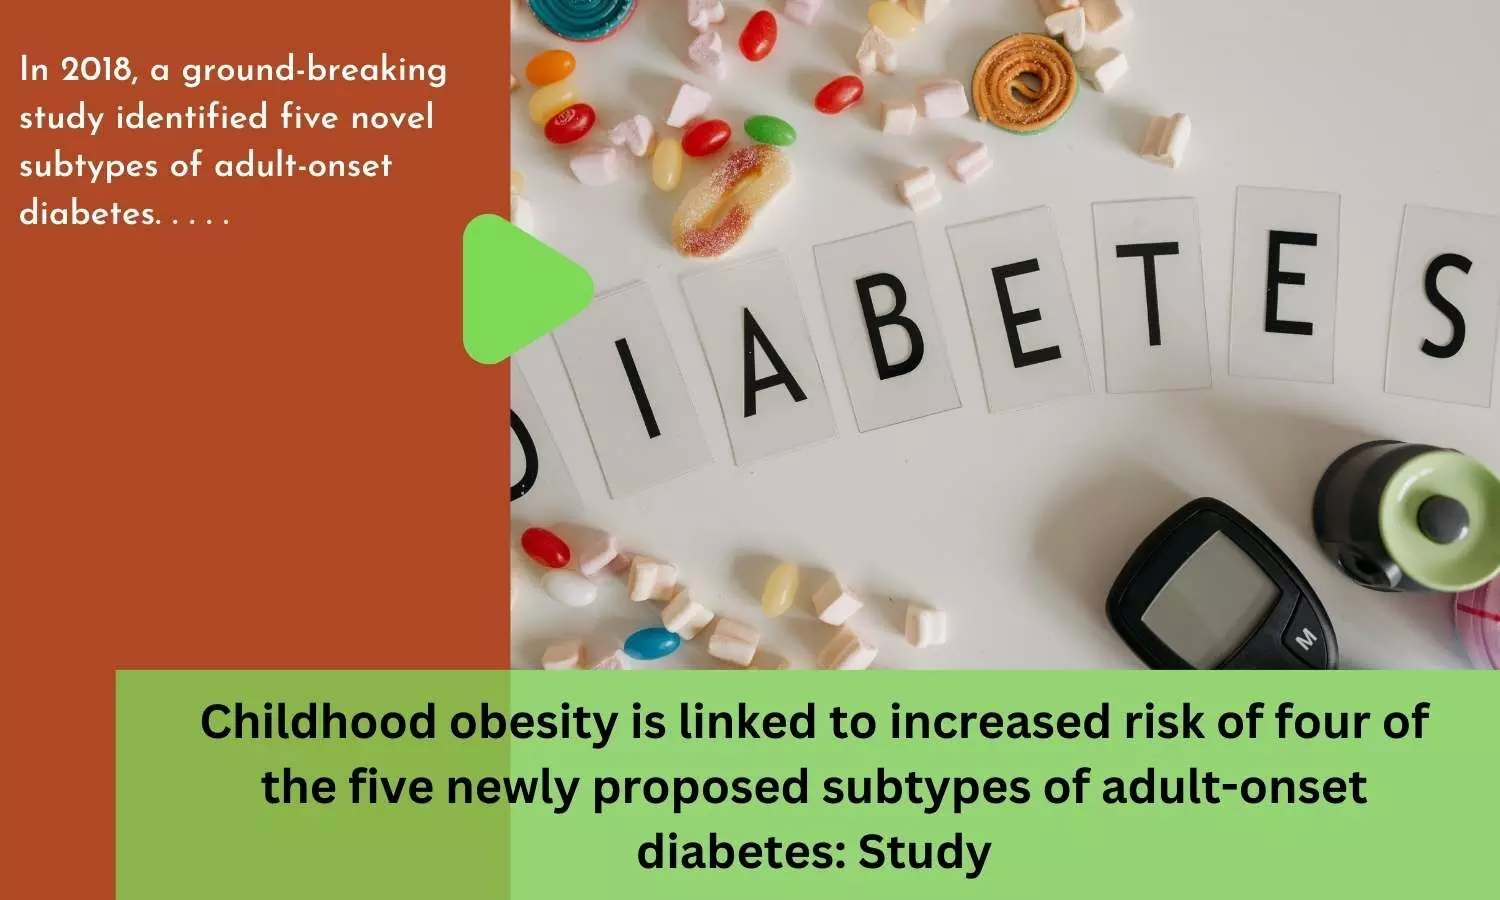 Childhood obesity is linked to increased risk of four of the five newly proposed subtypes of adult-onset diabetes: Study